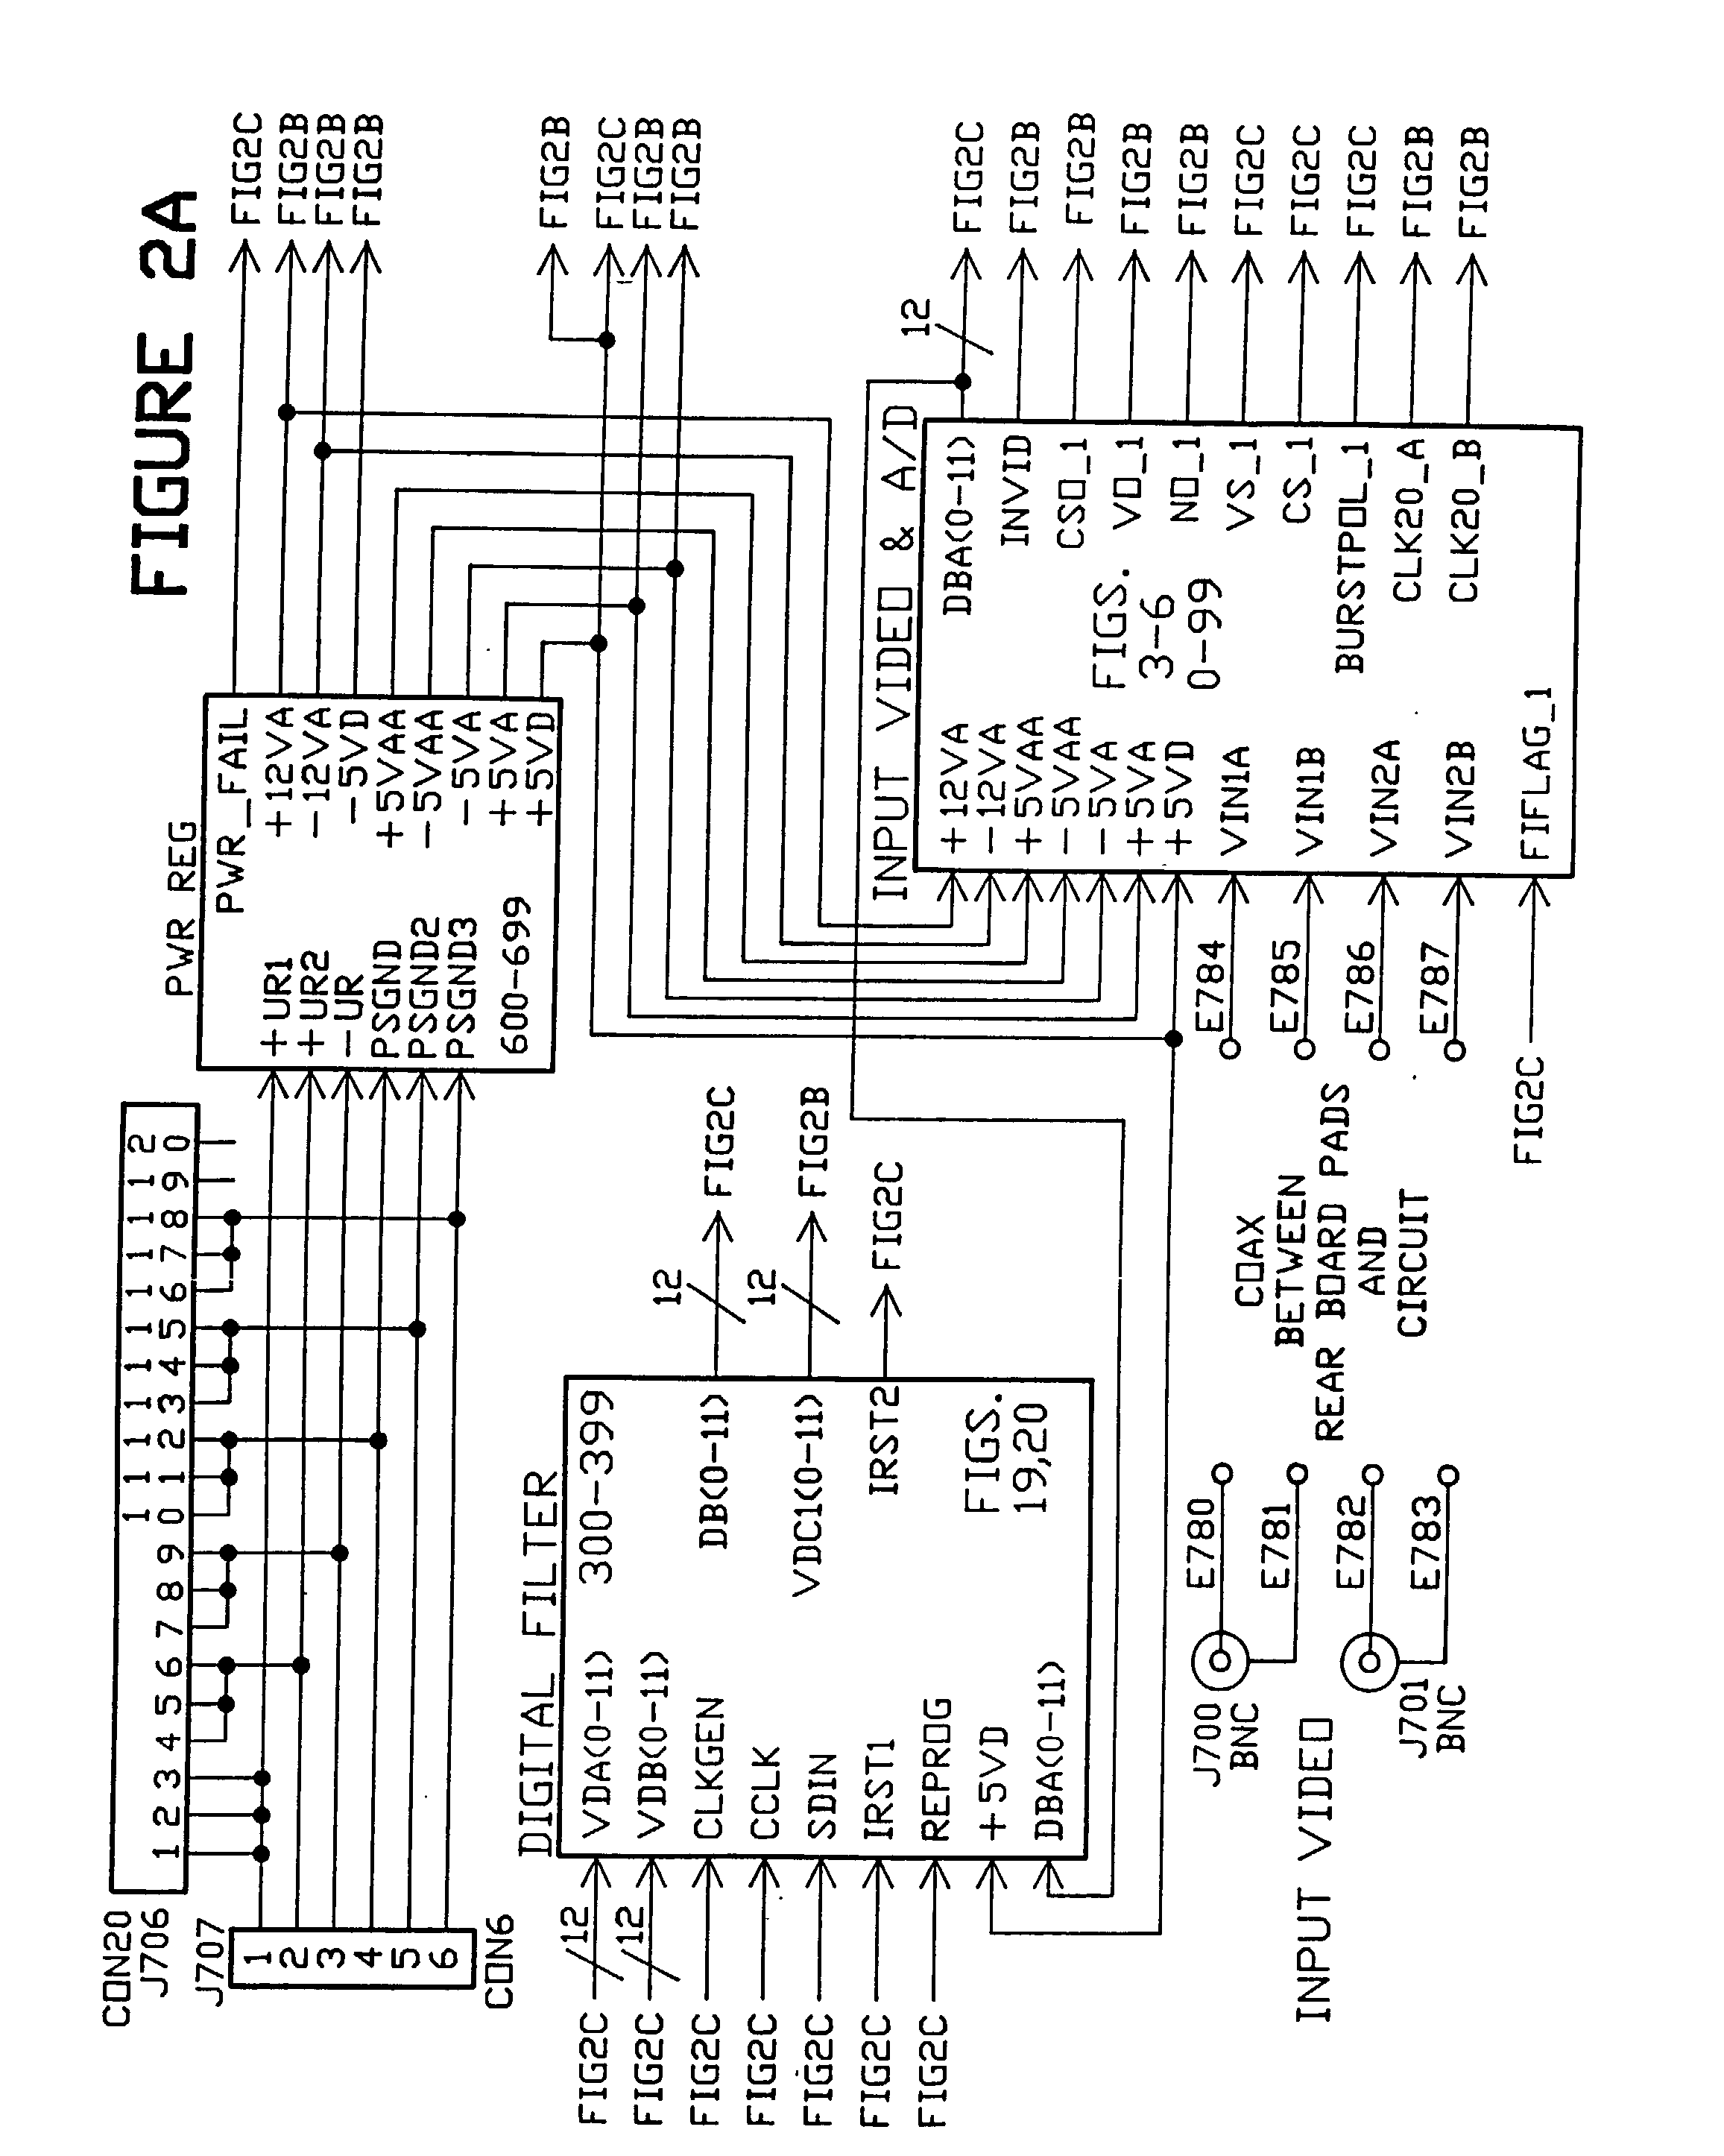 Apparatus and method for digital processing of analog television signals